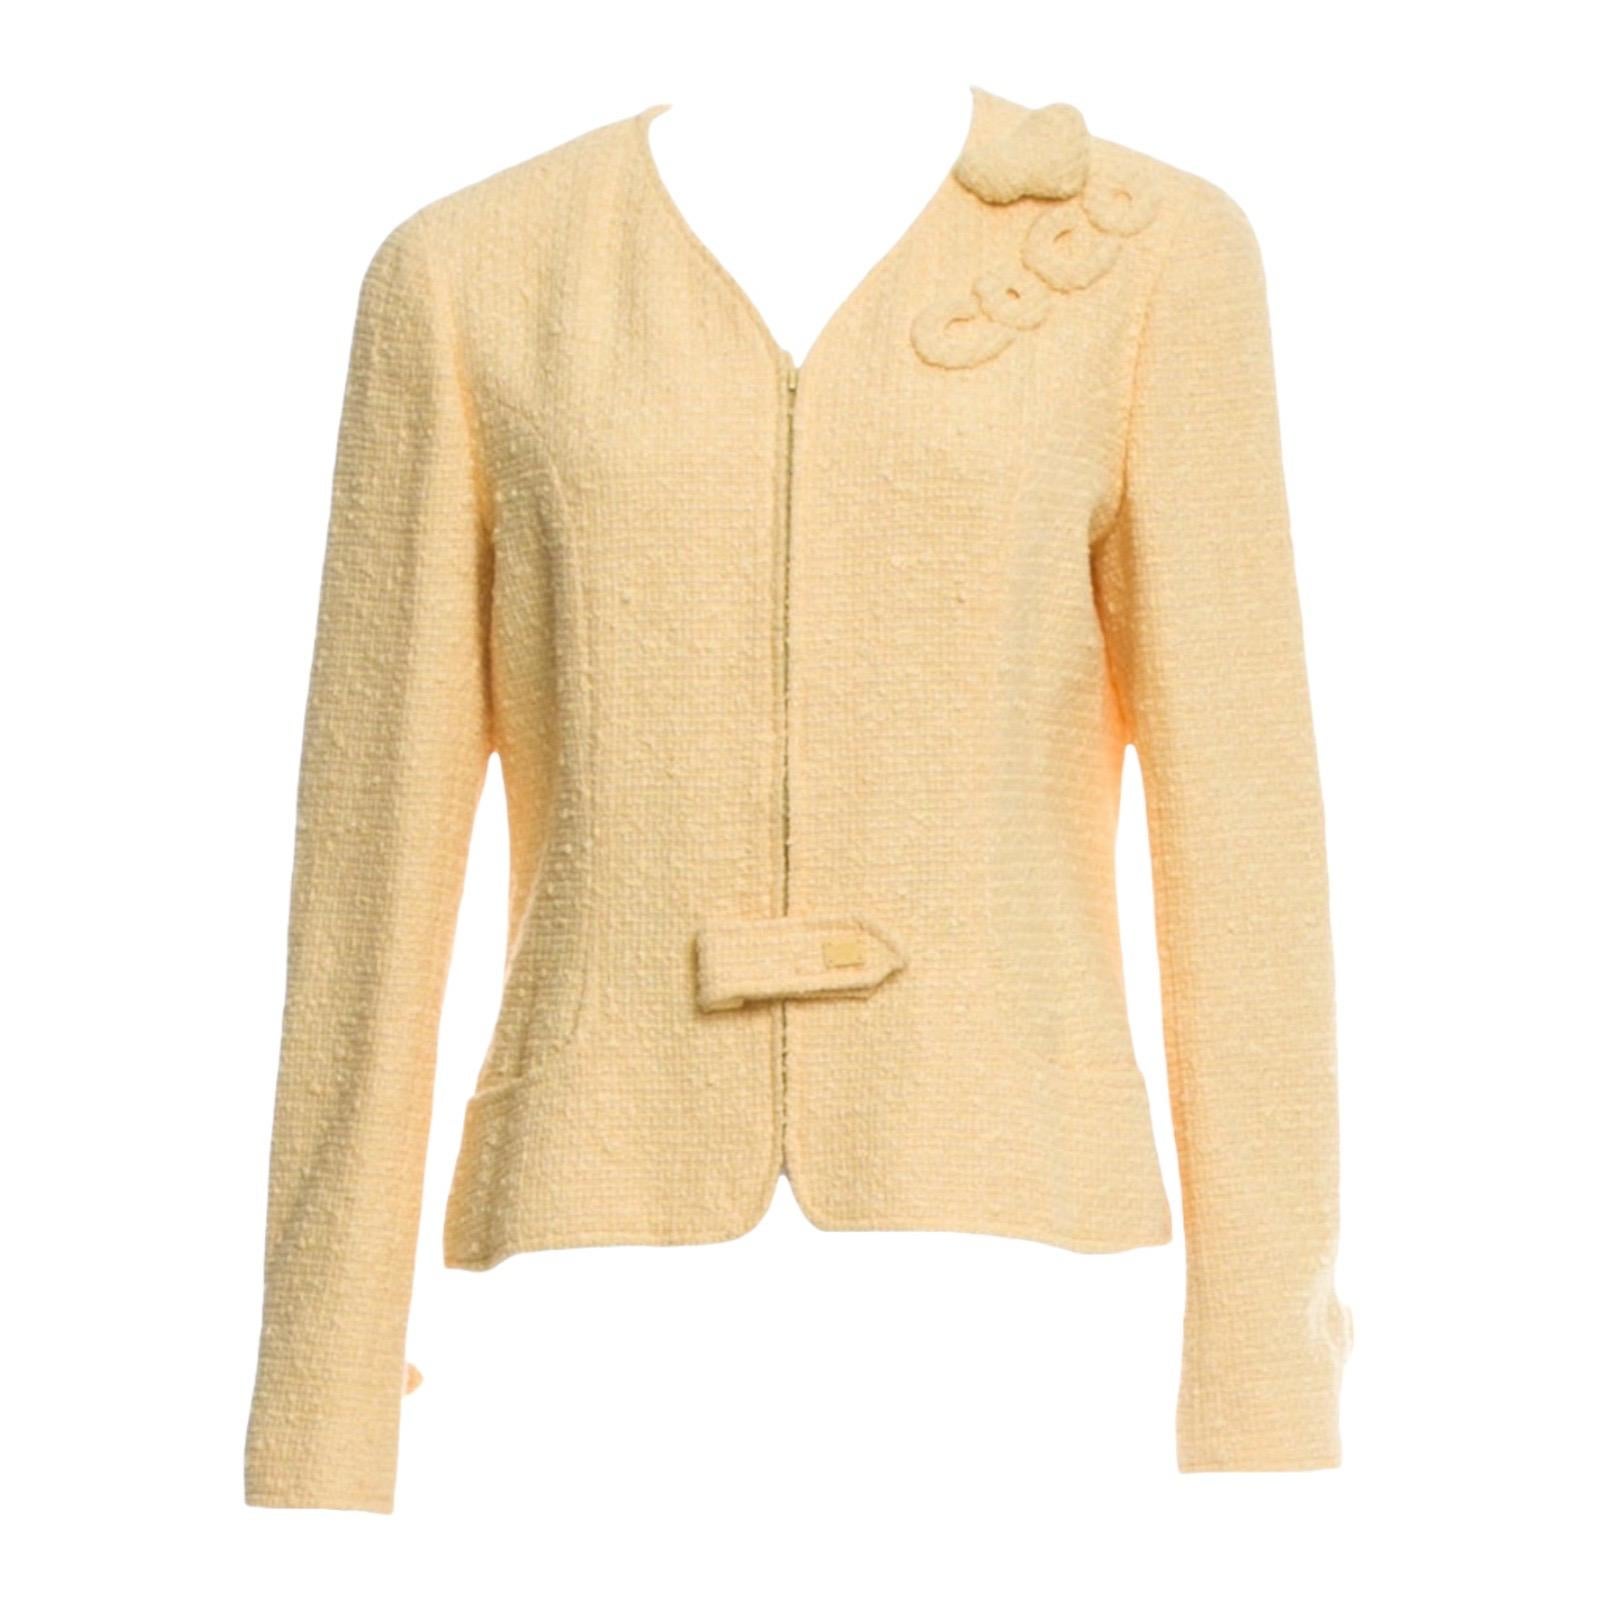 Beautiful CHANEL fantasy tweed jacket with heart and coco applications
A true CHANEL signature item that will last you for many years
Beautiful pale yellow tweed fabric
Jacket closes with zip and small latch with CC logo 
Completely lined with